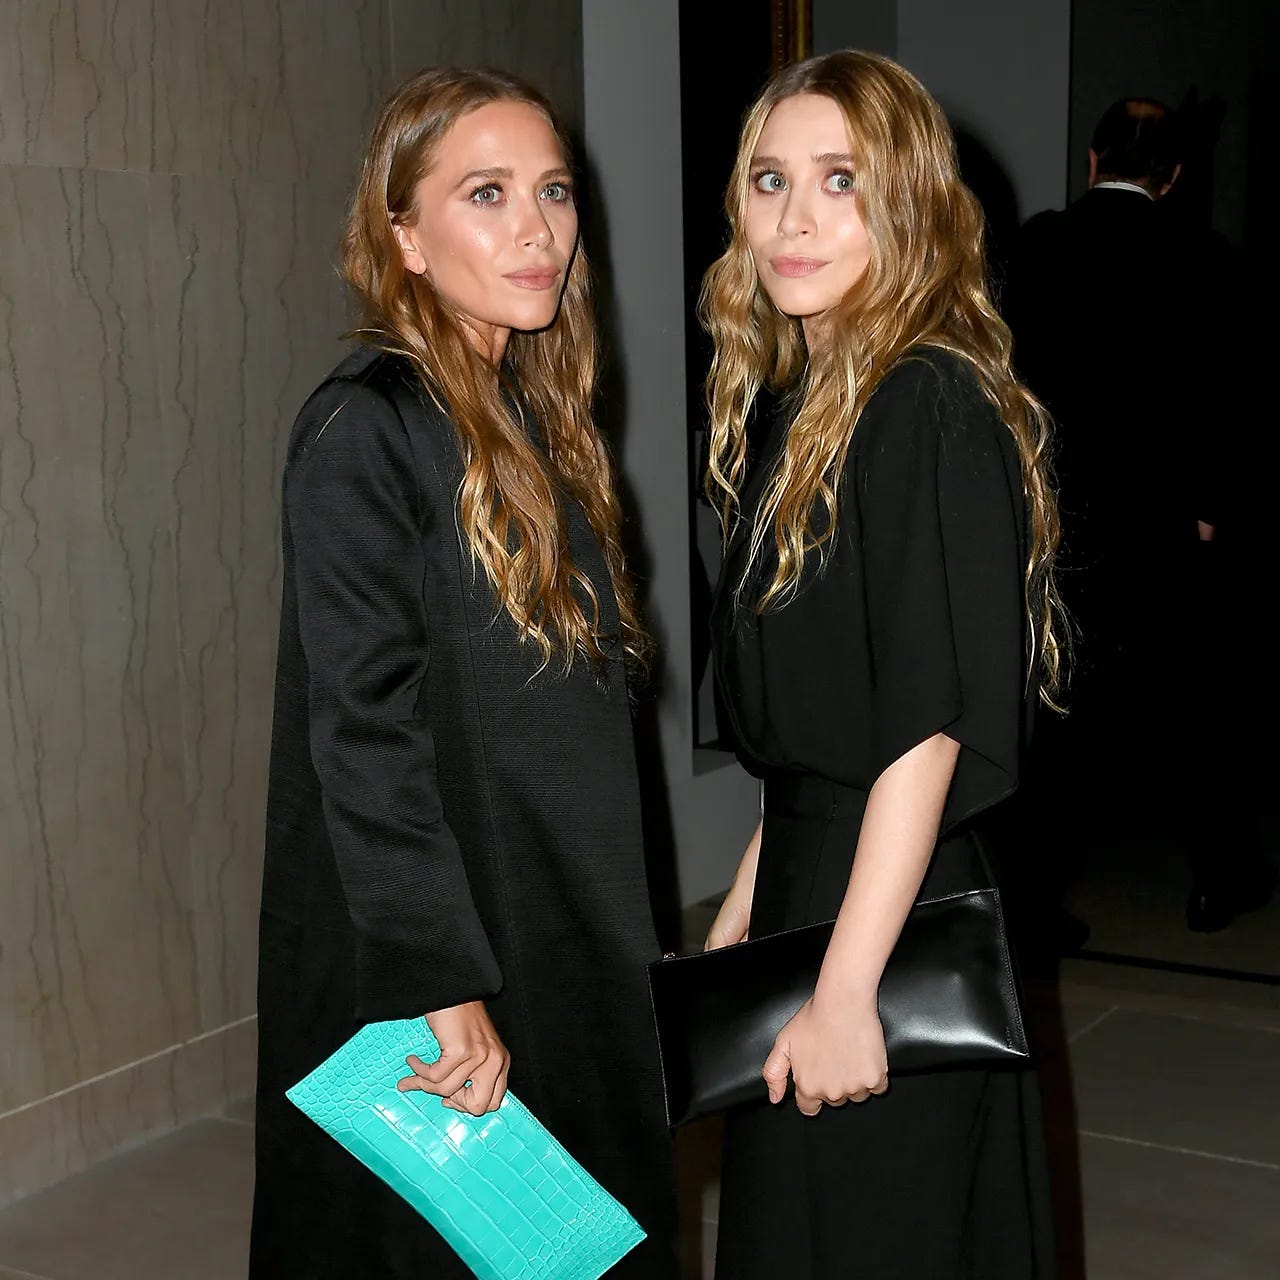 Image: The Olsen Twins, draped in black